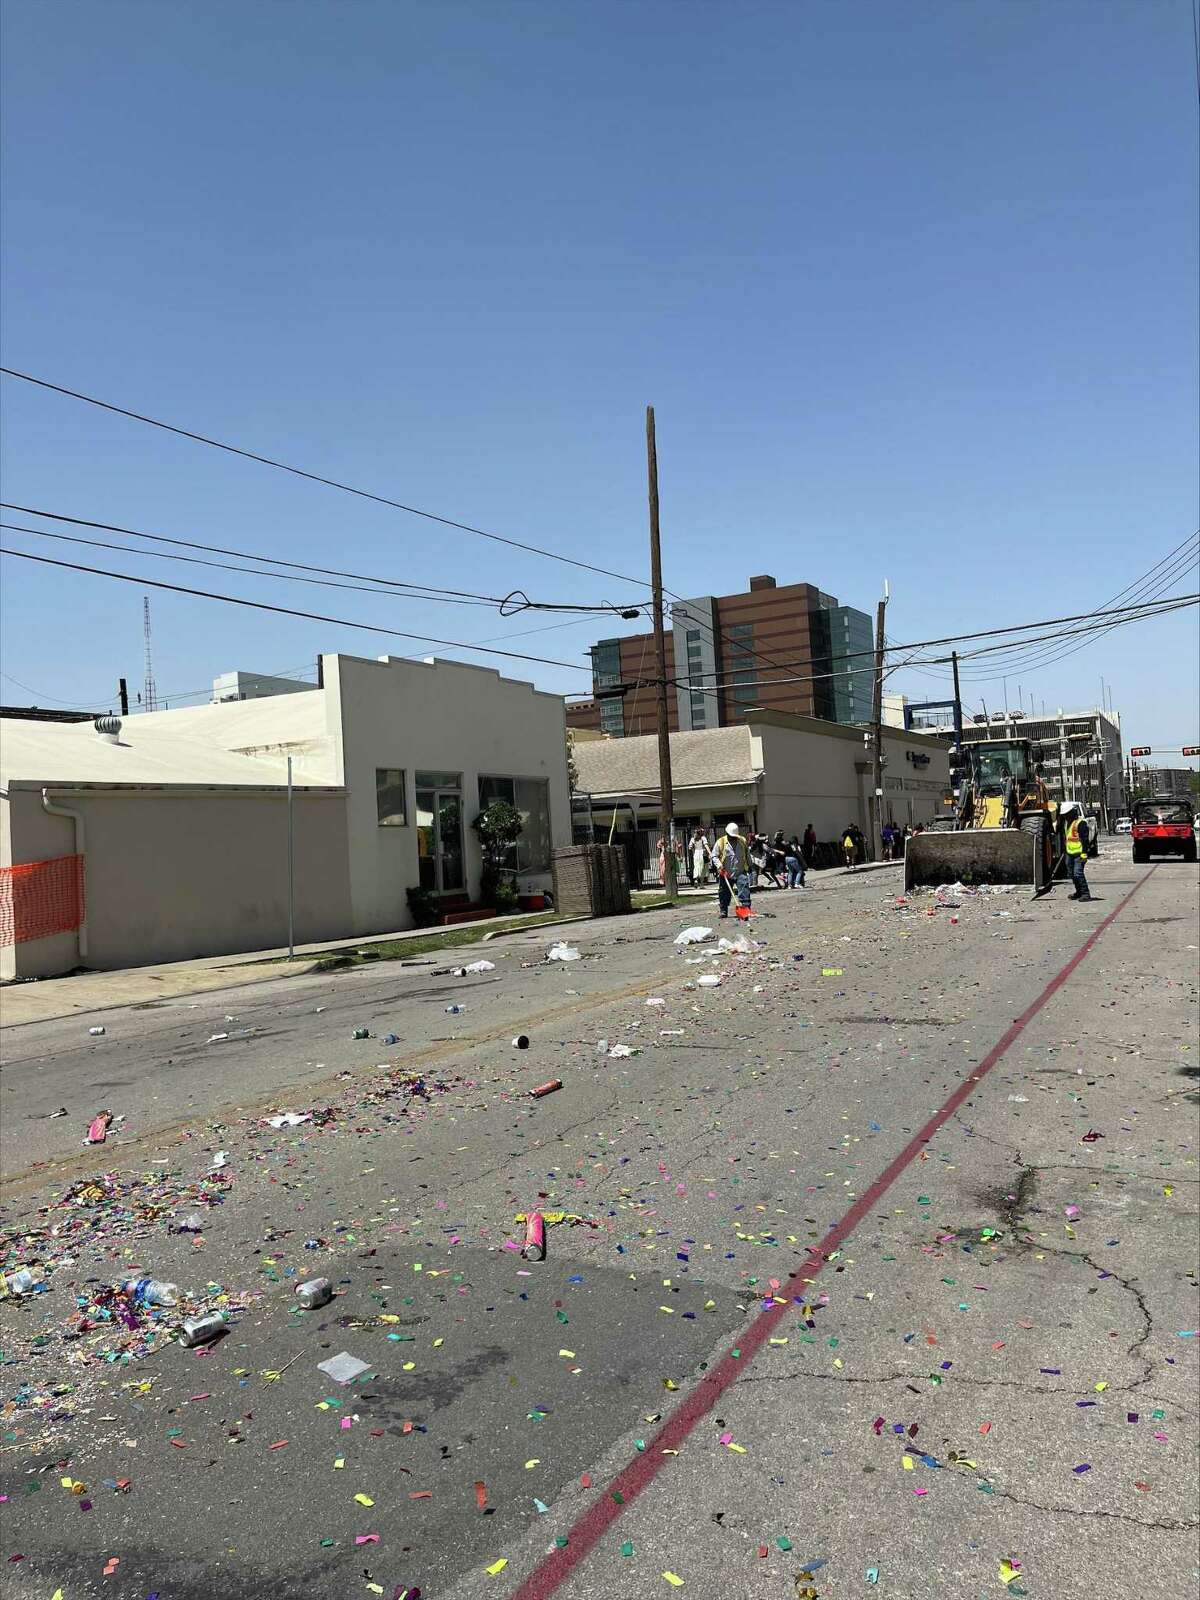 Public Works crews cleanup the streets after the Battle of Flowers, one of the main Fiesta events, on Friday, April 8.